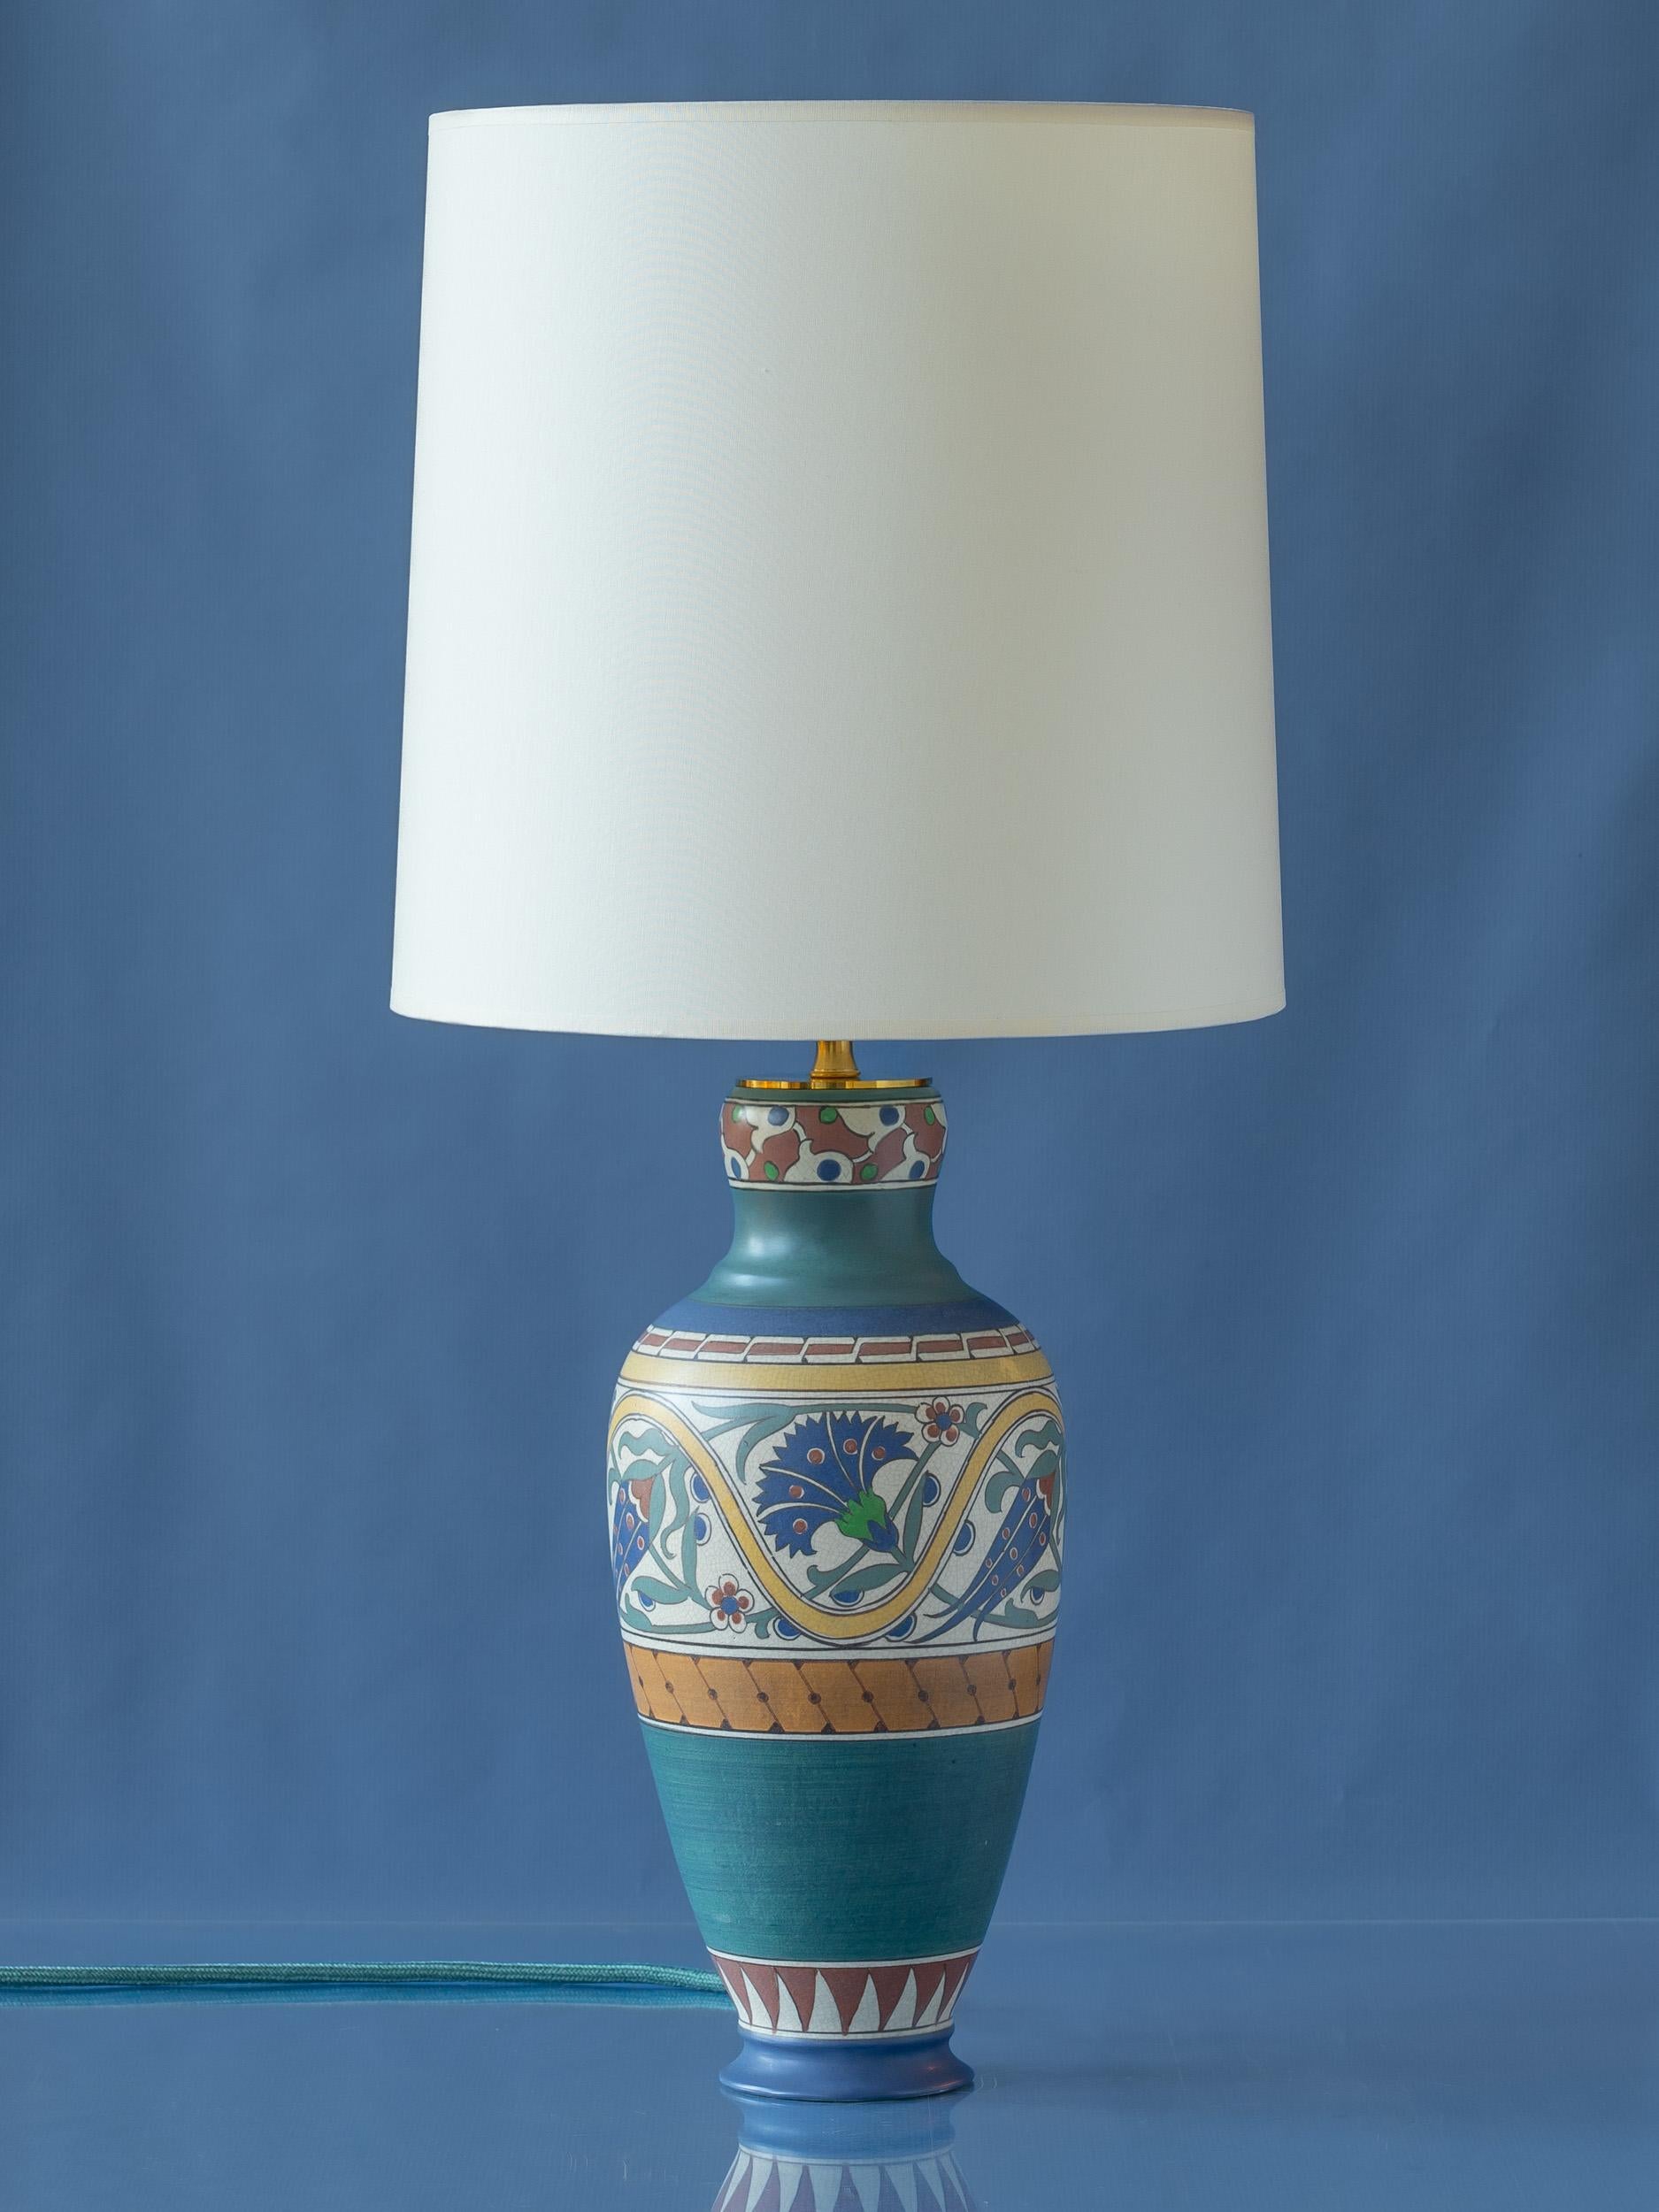 Meet Lindus! A one-of-a-kind lamp, lovingly handcrafted from an antique, rare vase from the renowned Arnhemsche Fayencefabriek. This vase, forming the lamp's base, is a testament to superb artistry of the past, featuring a distinctive matte glaze